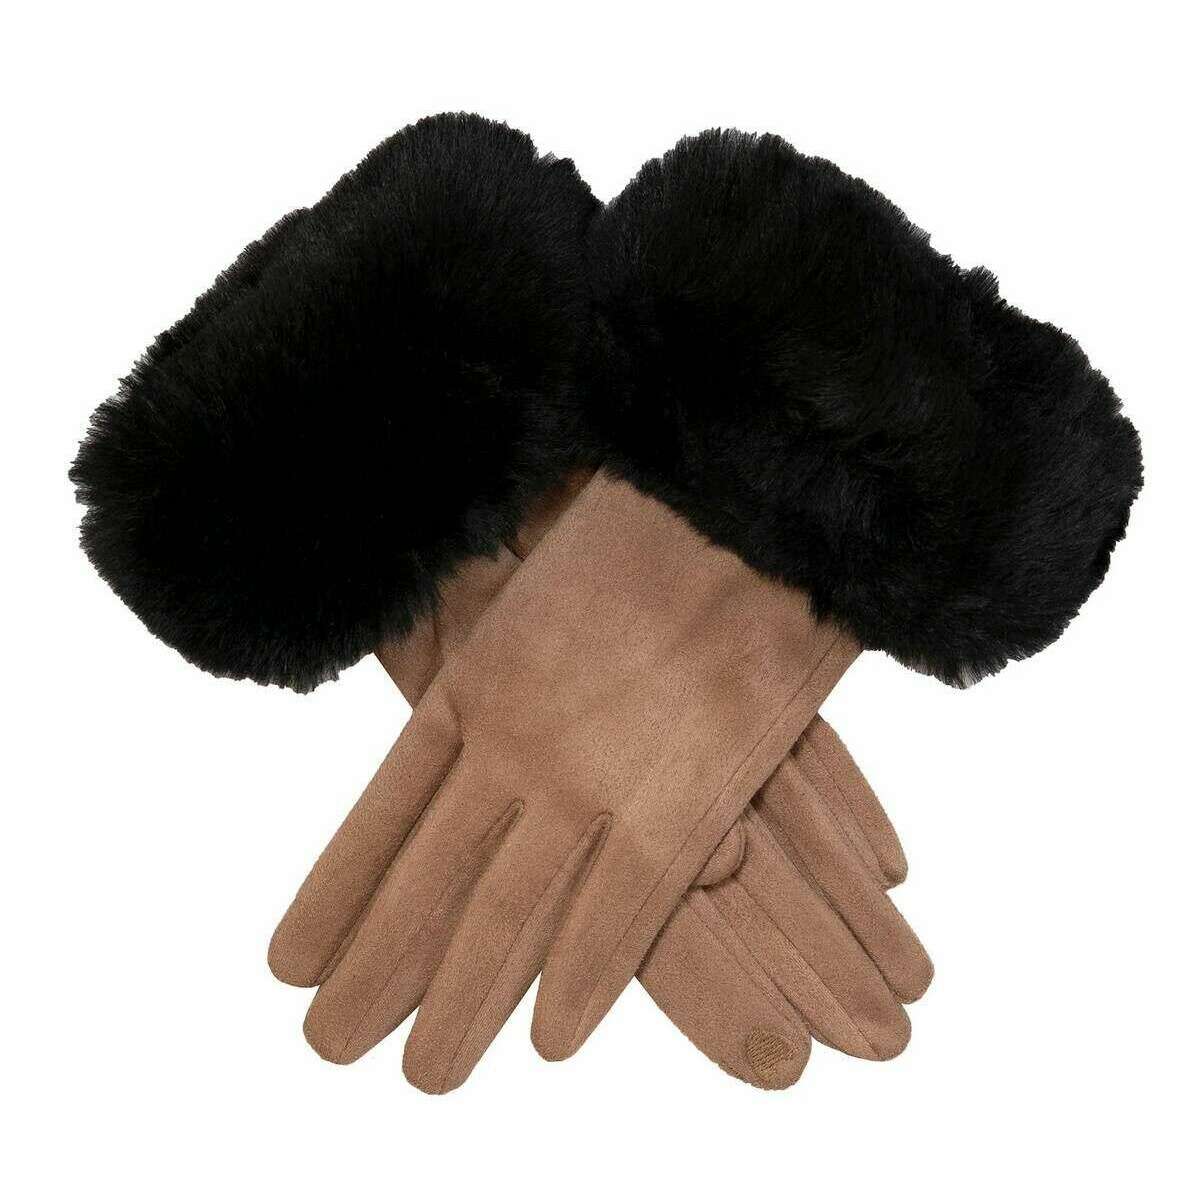 Dents Cuff Touchscreen Velour-Lined Faux Suede Gloves - Camel Beige/Black